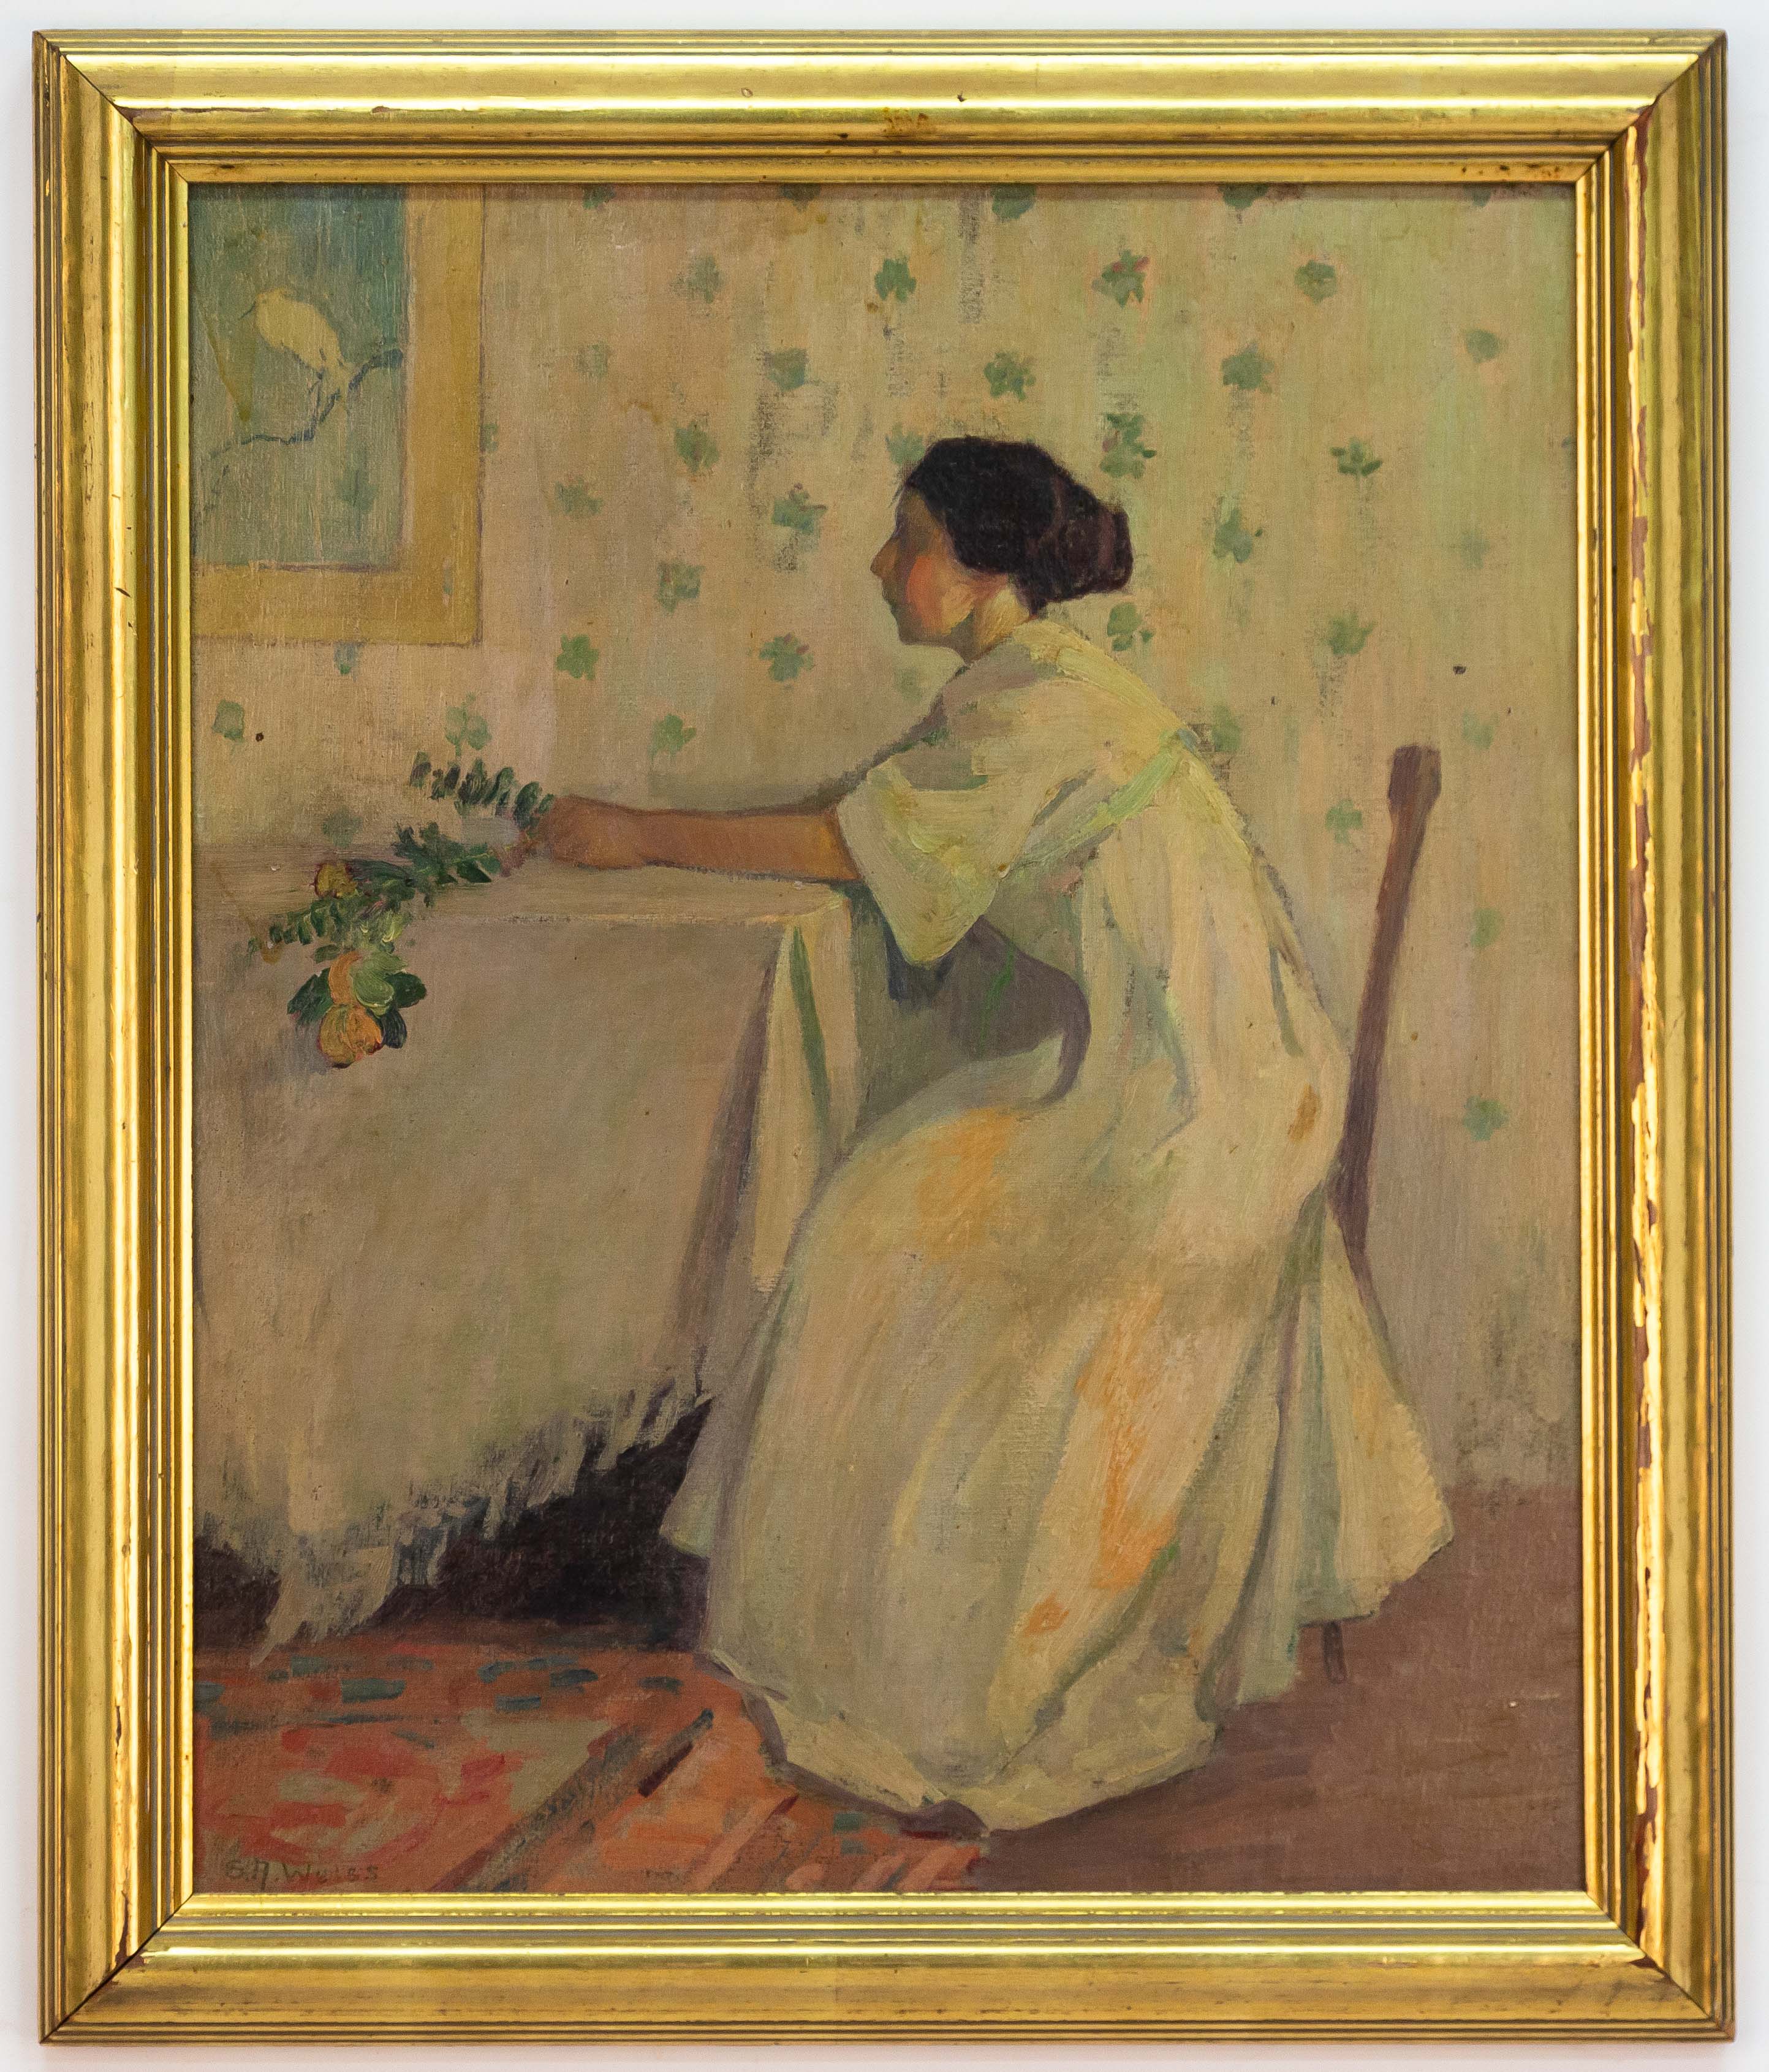 S. A. Weiss (20th Century) Seated Woman | Cottone Auctions